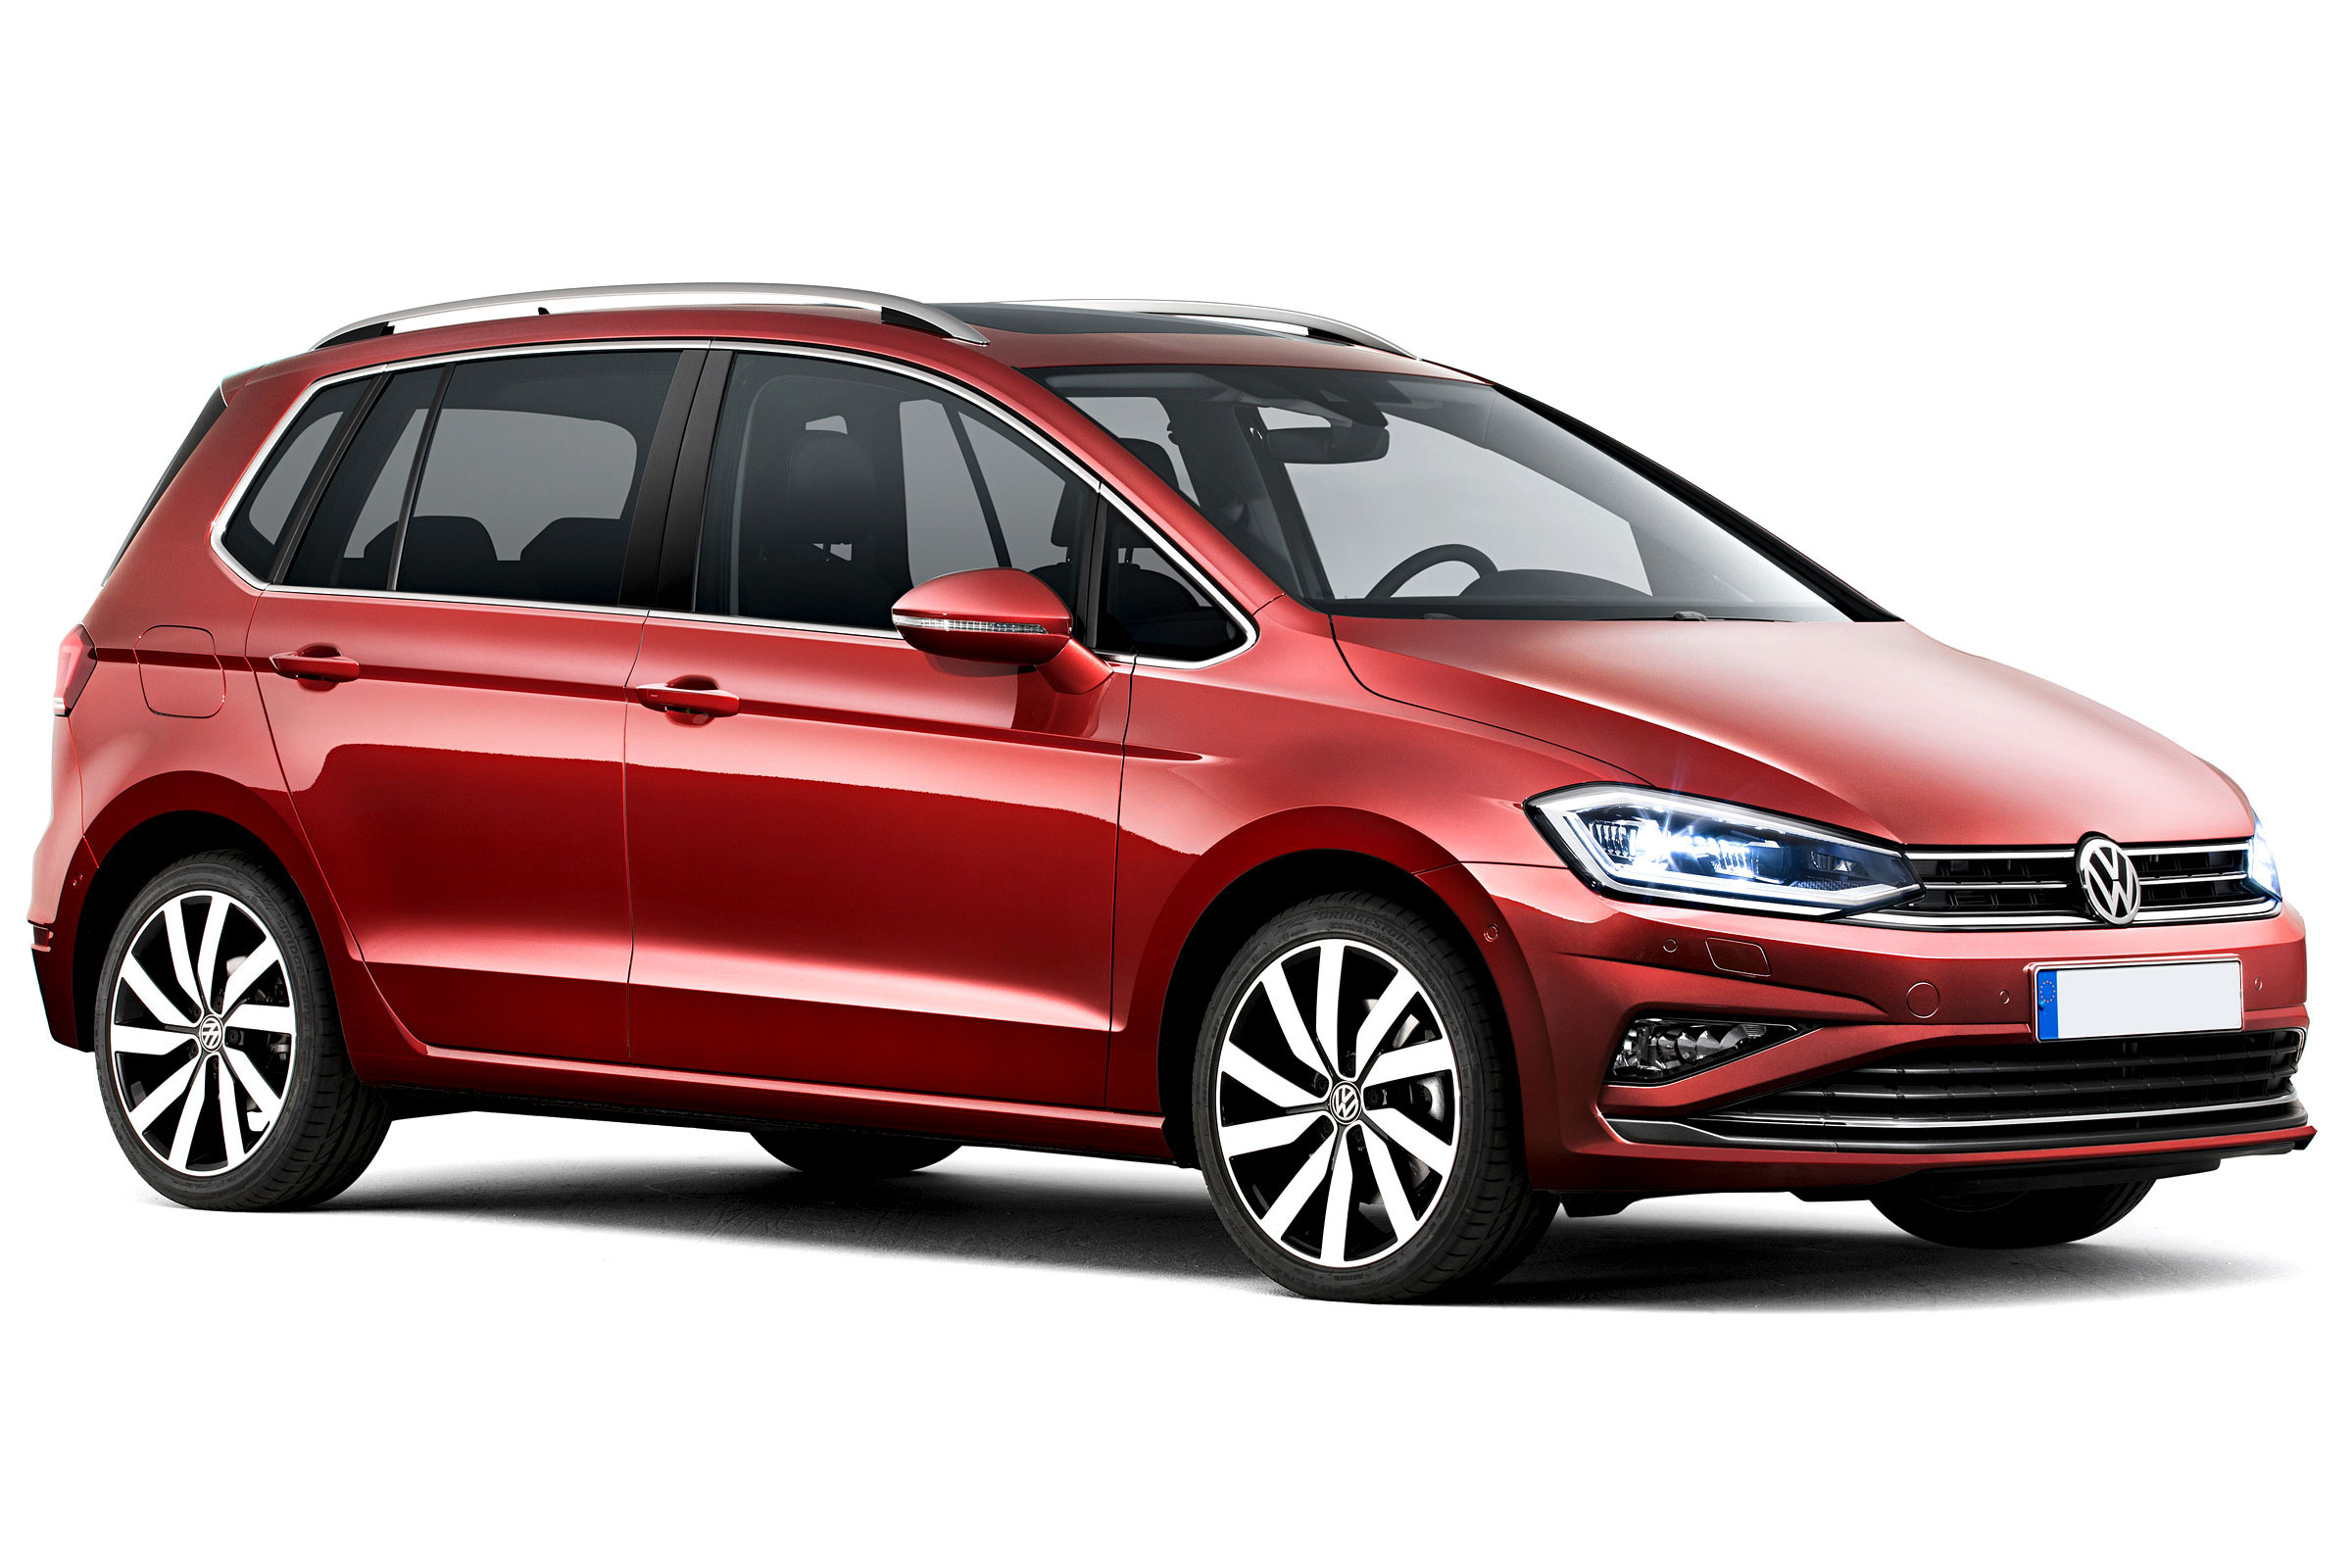 Volkswagen Golf SV MPV - Practicality & boot space (2014-2020) 2020 review